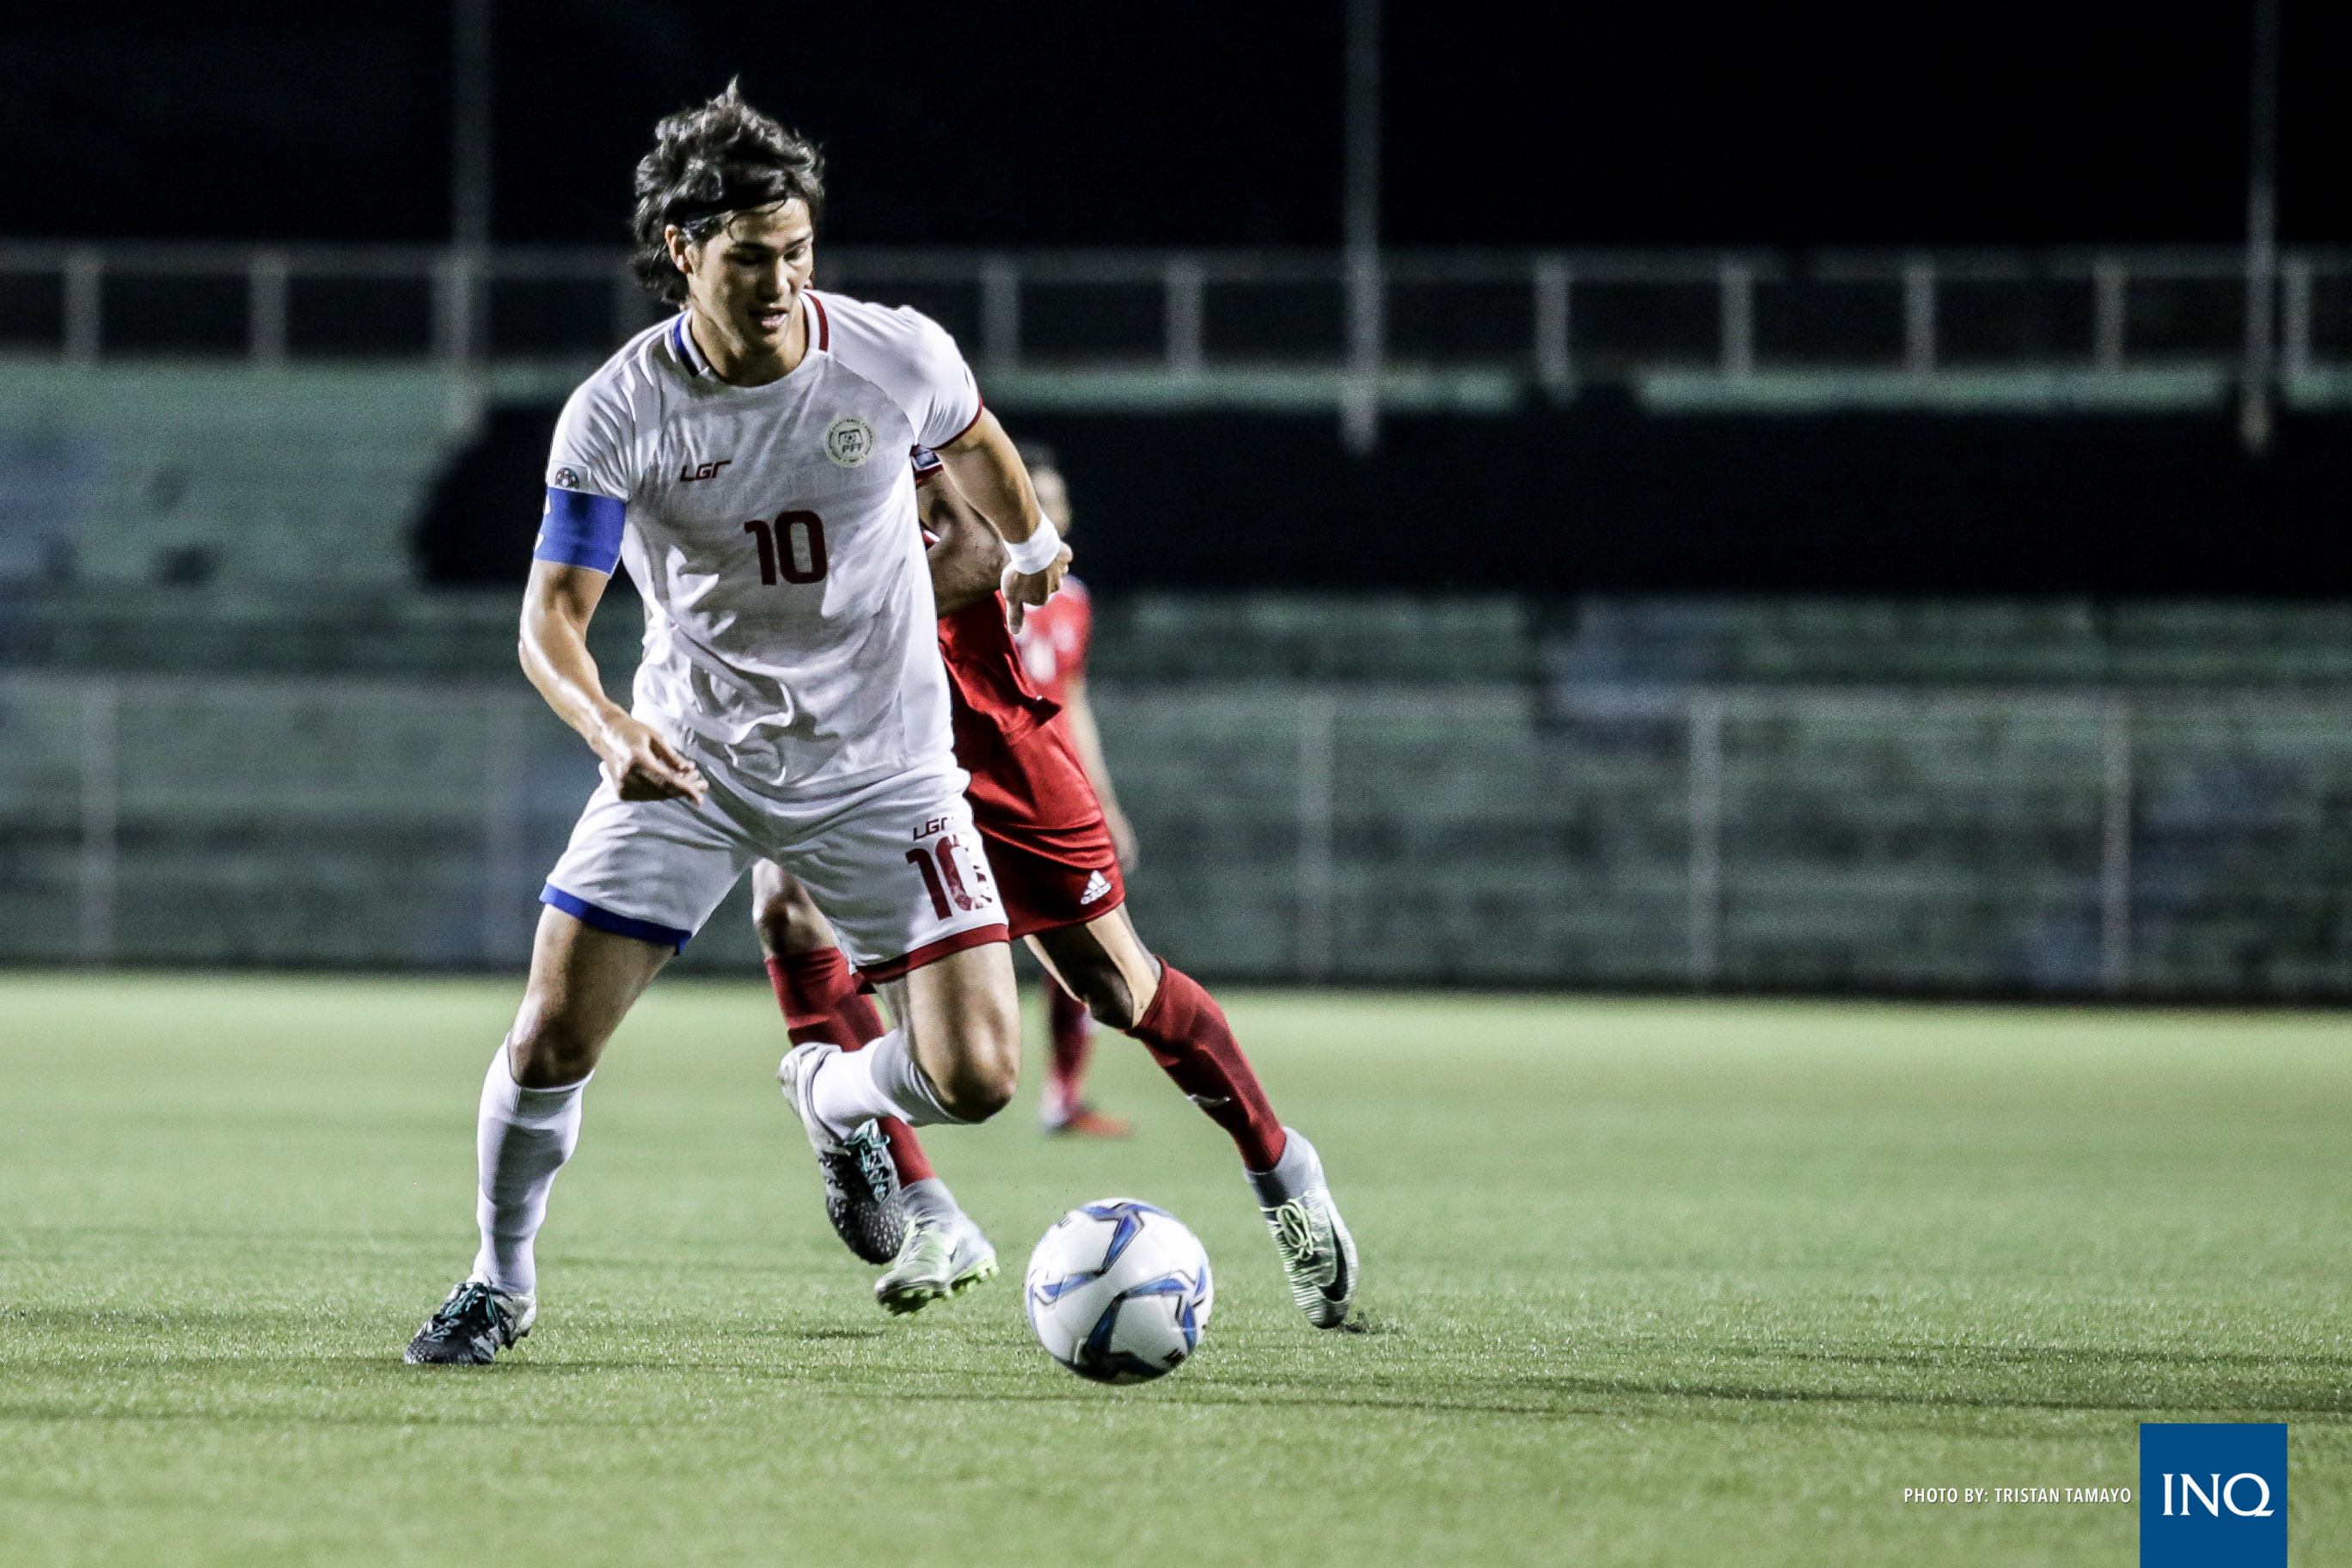 Philippine Azkals vs Nepal in the  2019 AFC Asian Cup qualifiers. Photo by: Tristan Tamayo/Inquirer.net